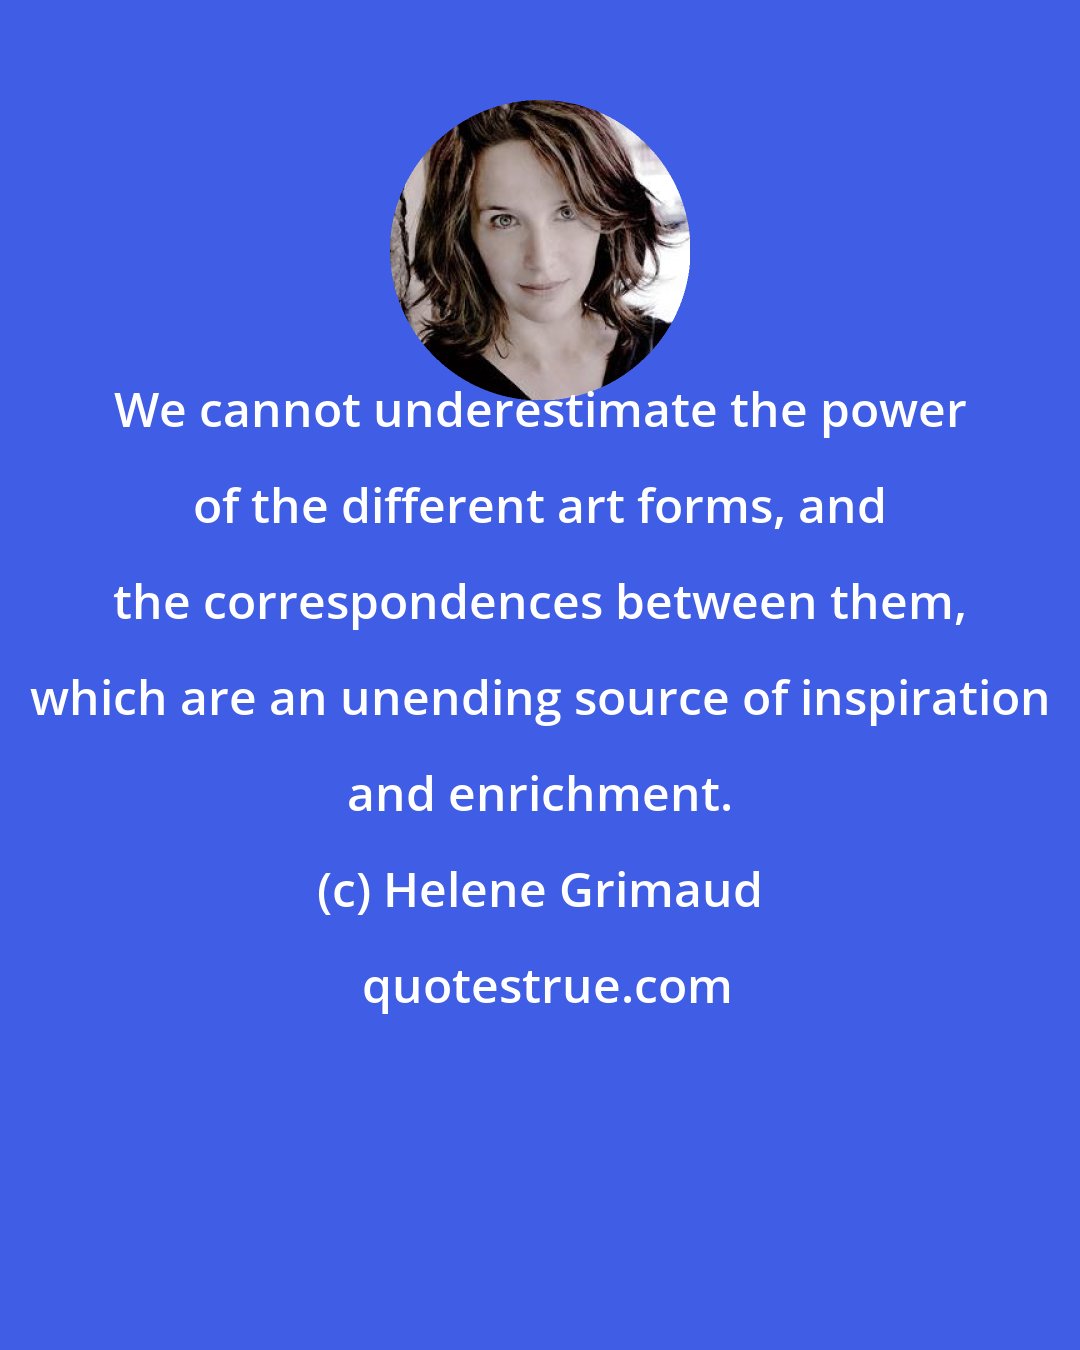 Helene Grimaud: We cannot underestimate the power of the different art forms, and the correspondences between them, which are an unending source of inspiration and enrichment.